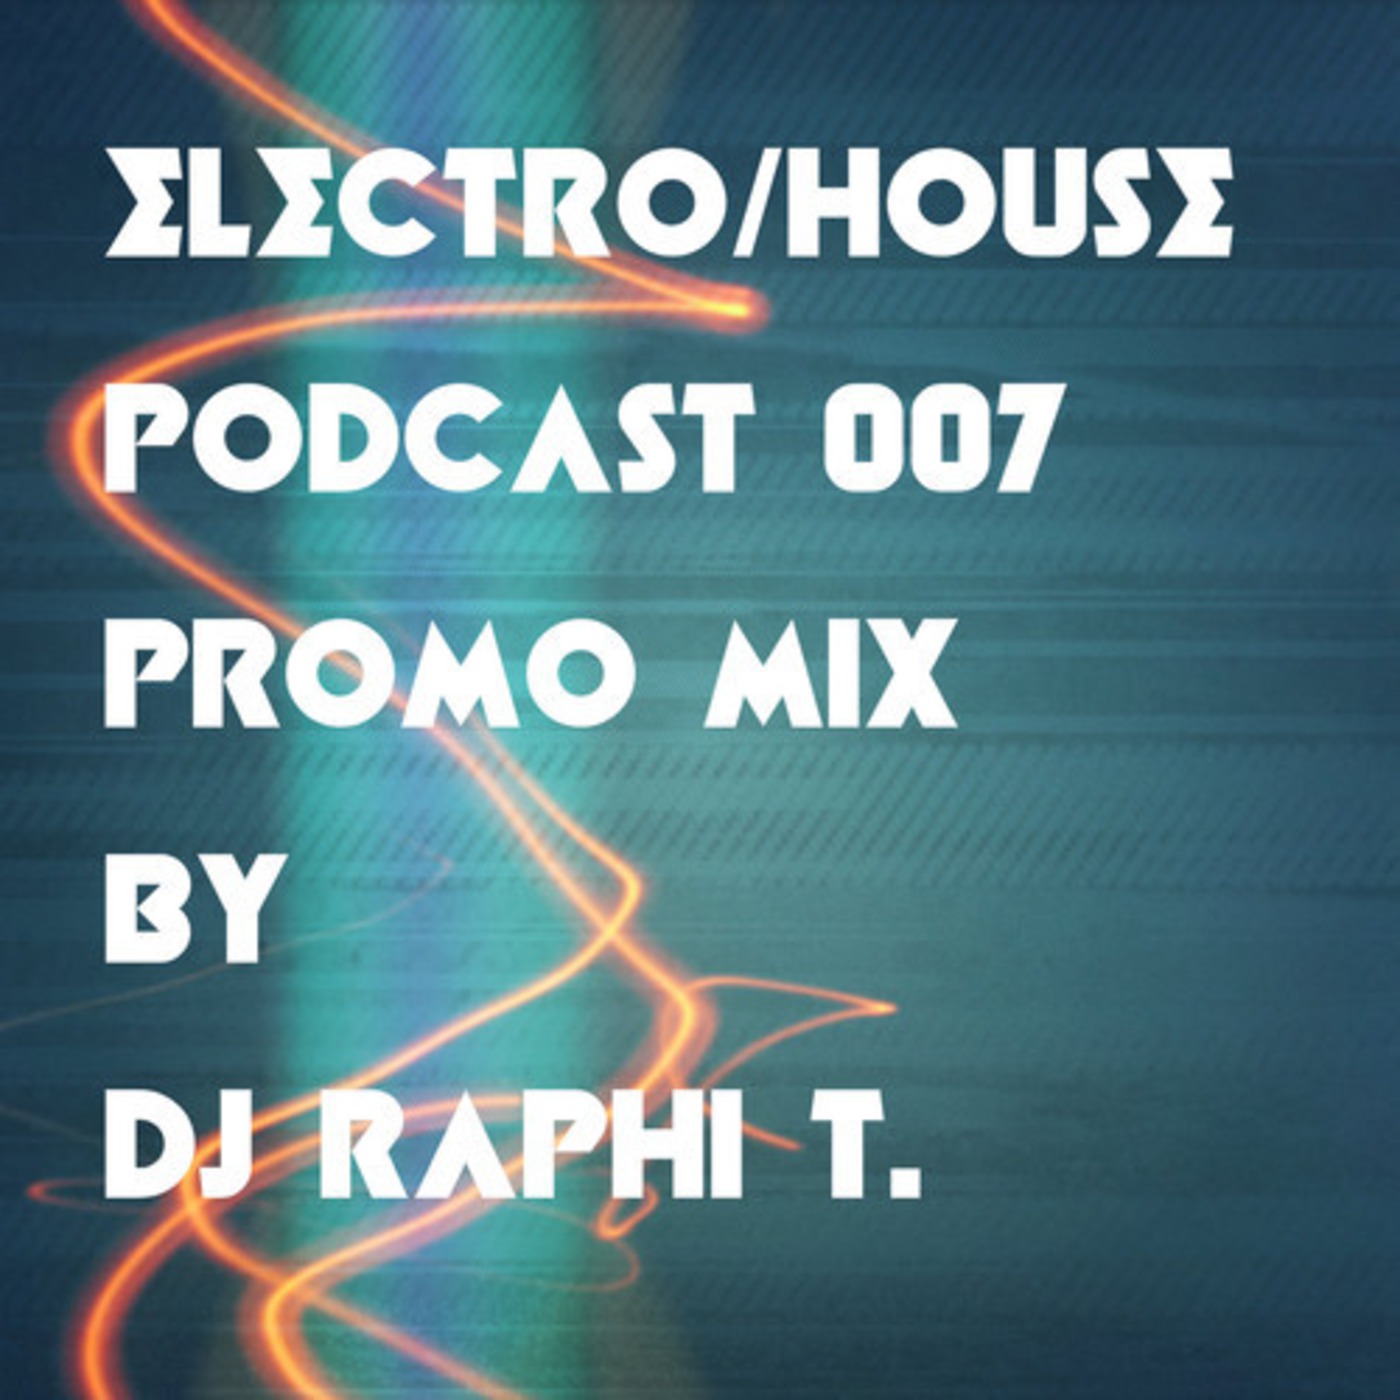 DJ RAPHI T IN THE MIX - ELECTRO HOUSE | Listen Free on Castbox.